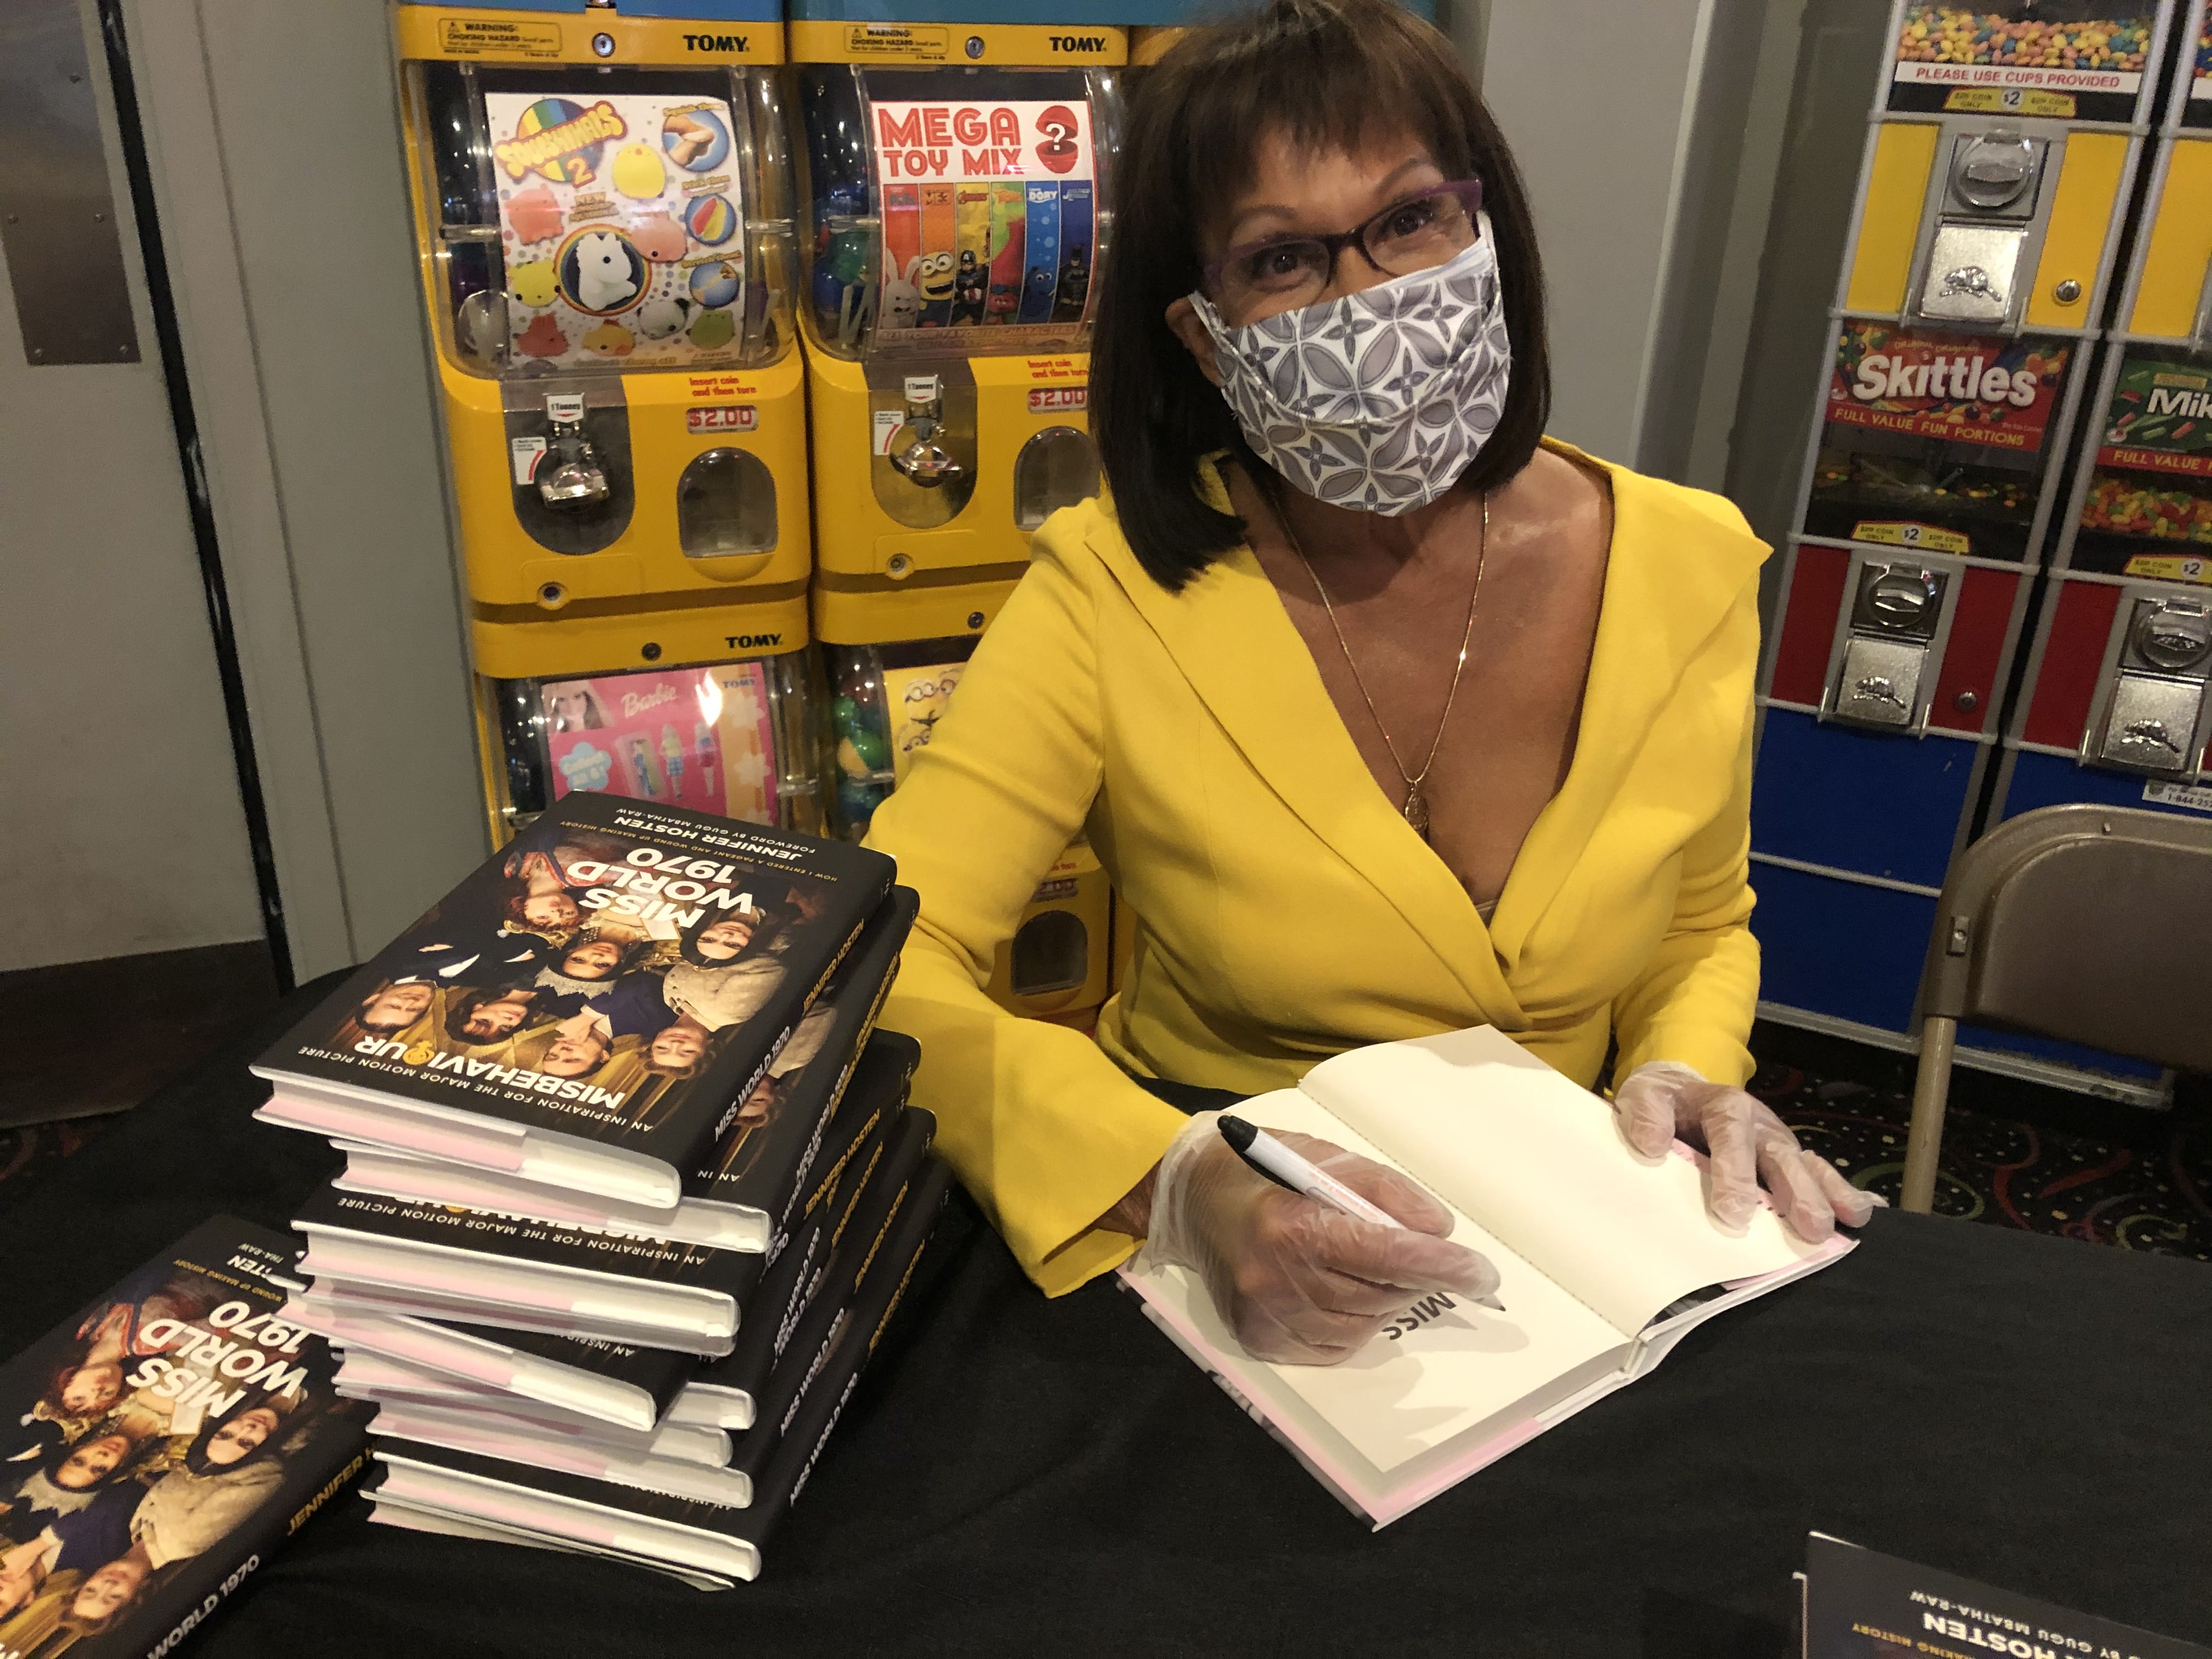 Hosten signing copies of her book at Wednesday night